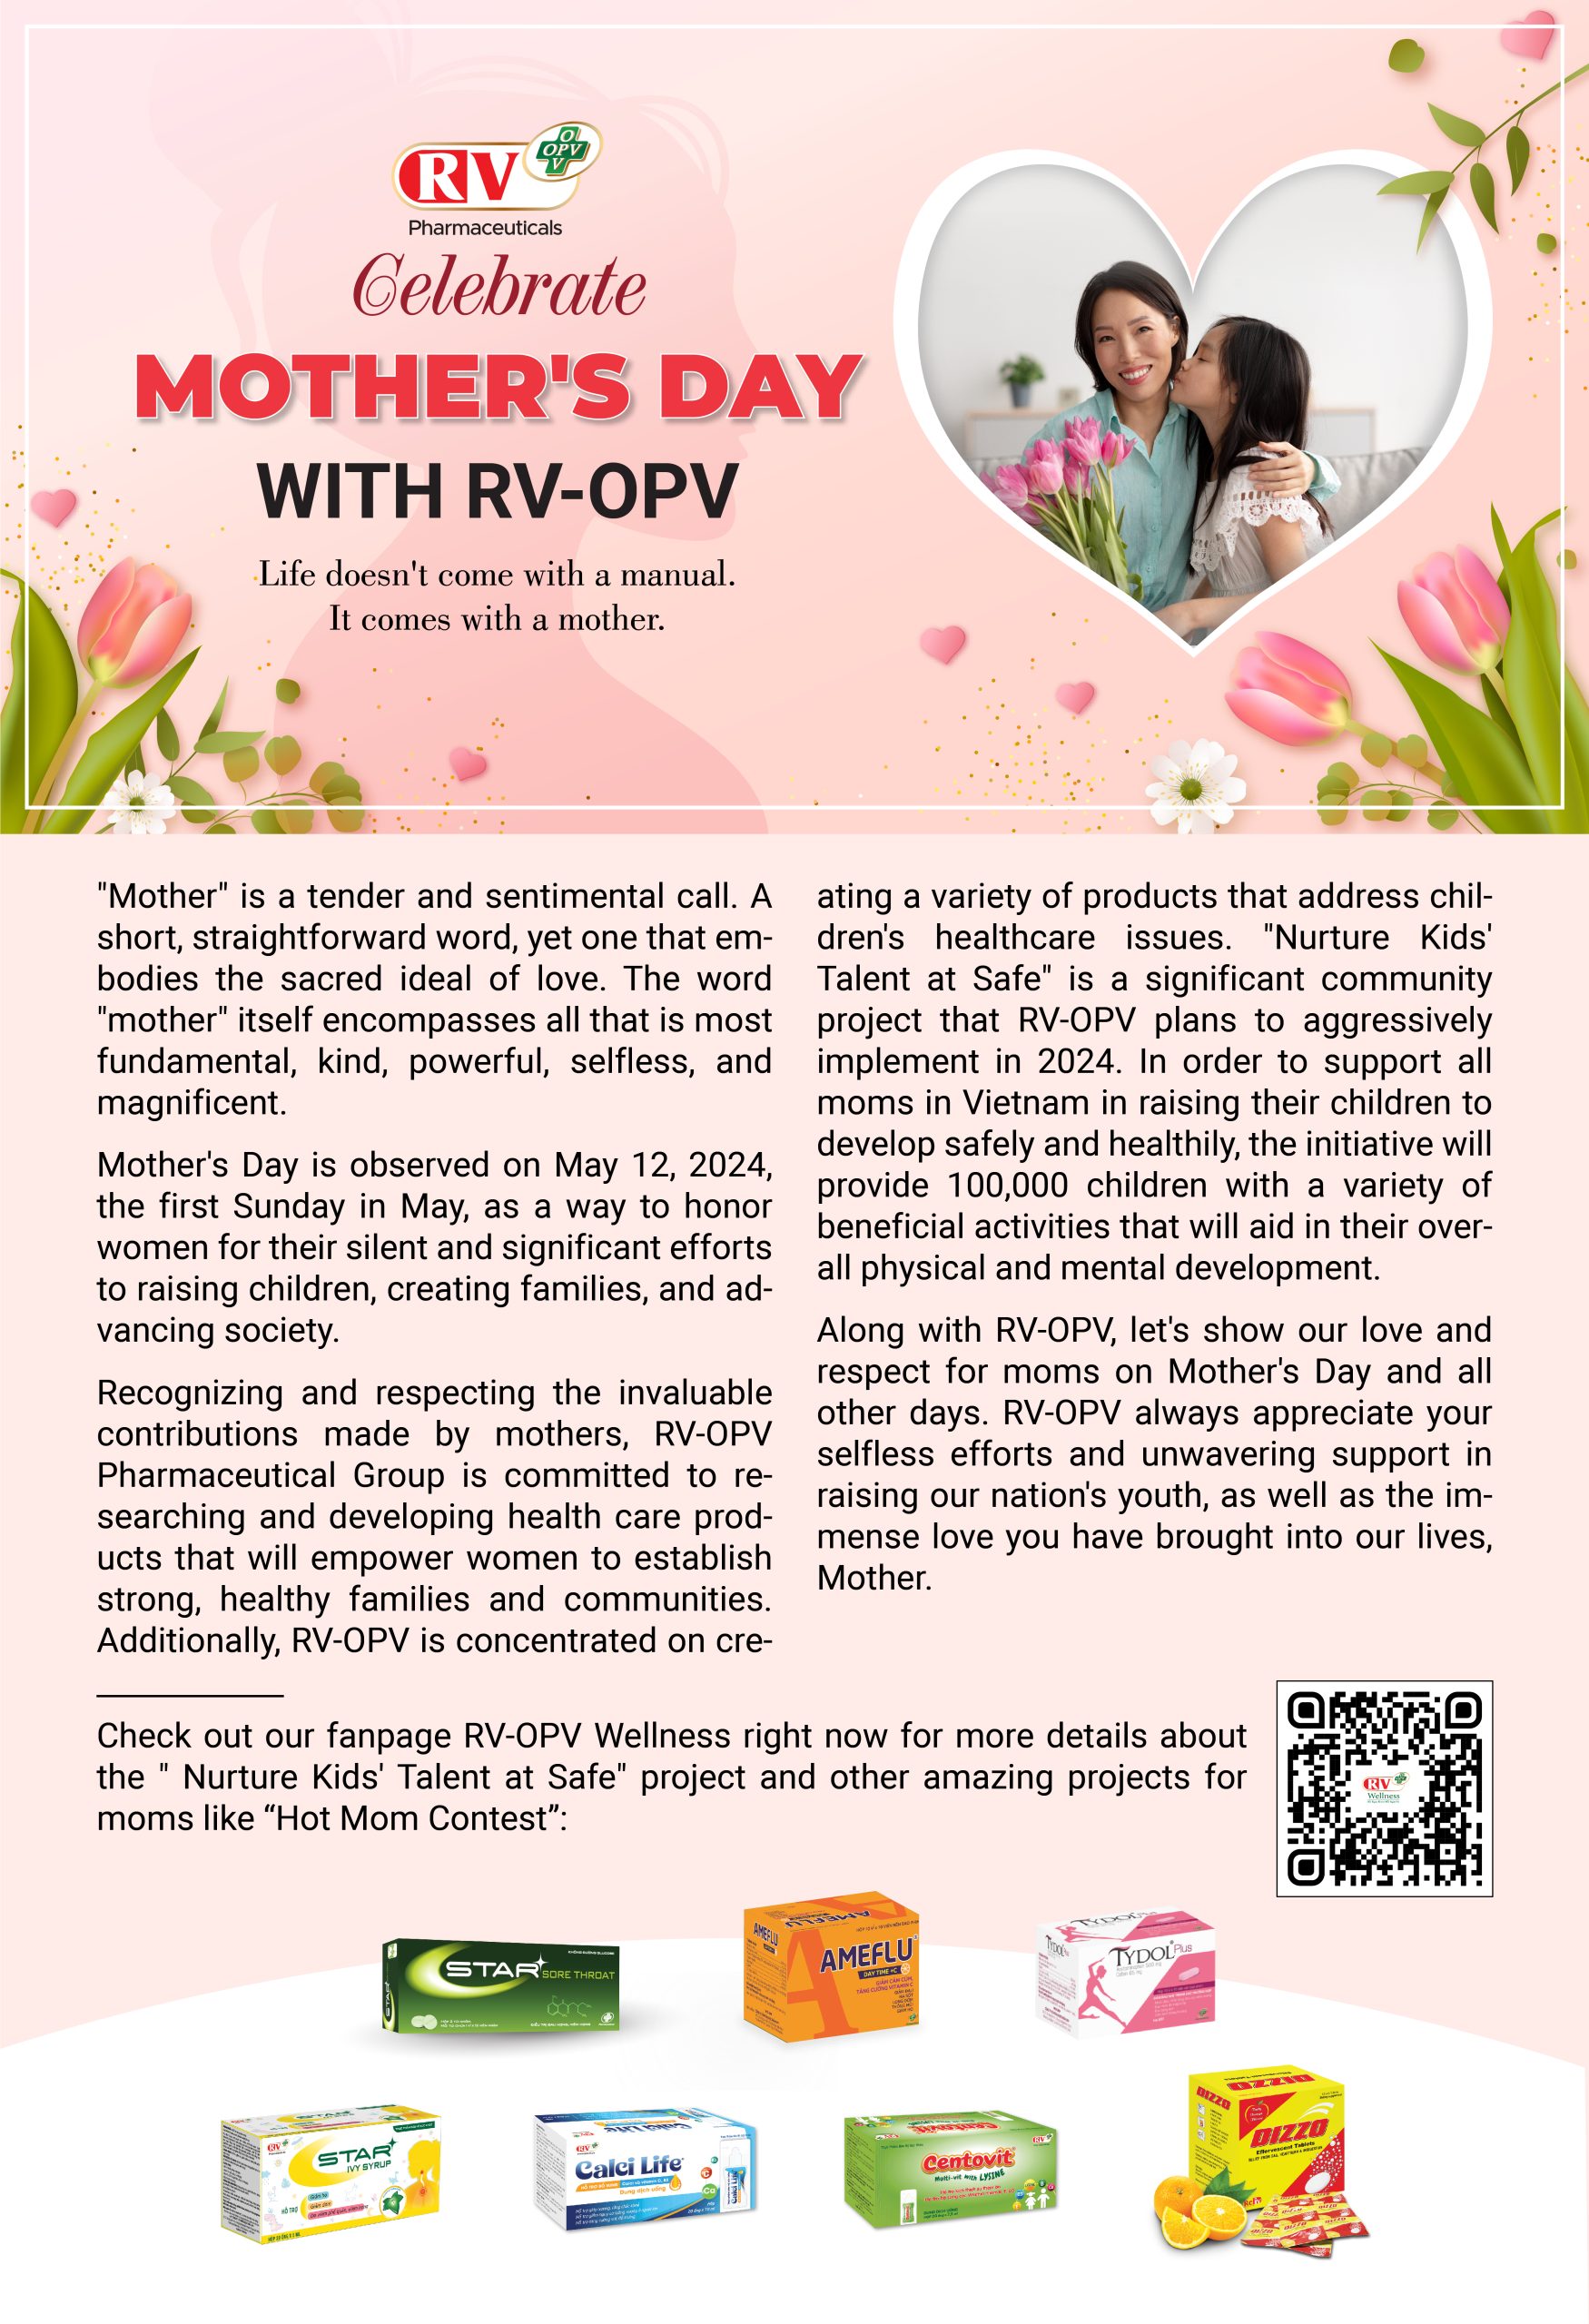 CELEBRATE MOTHER’S DAY WITH RV-OPV